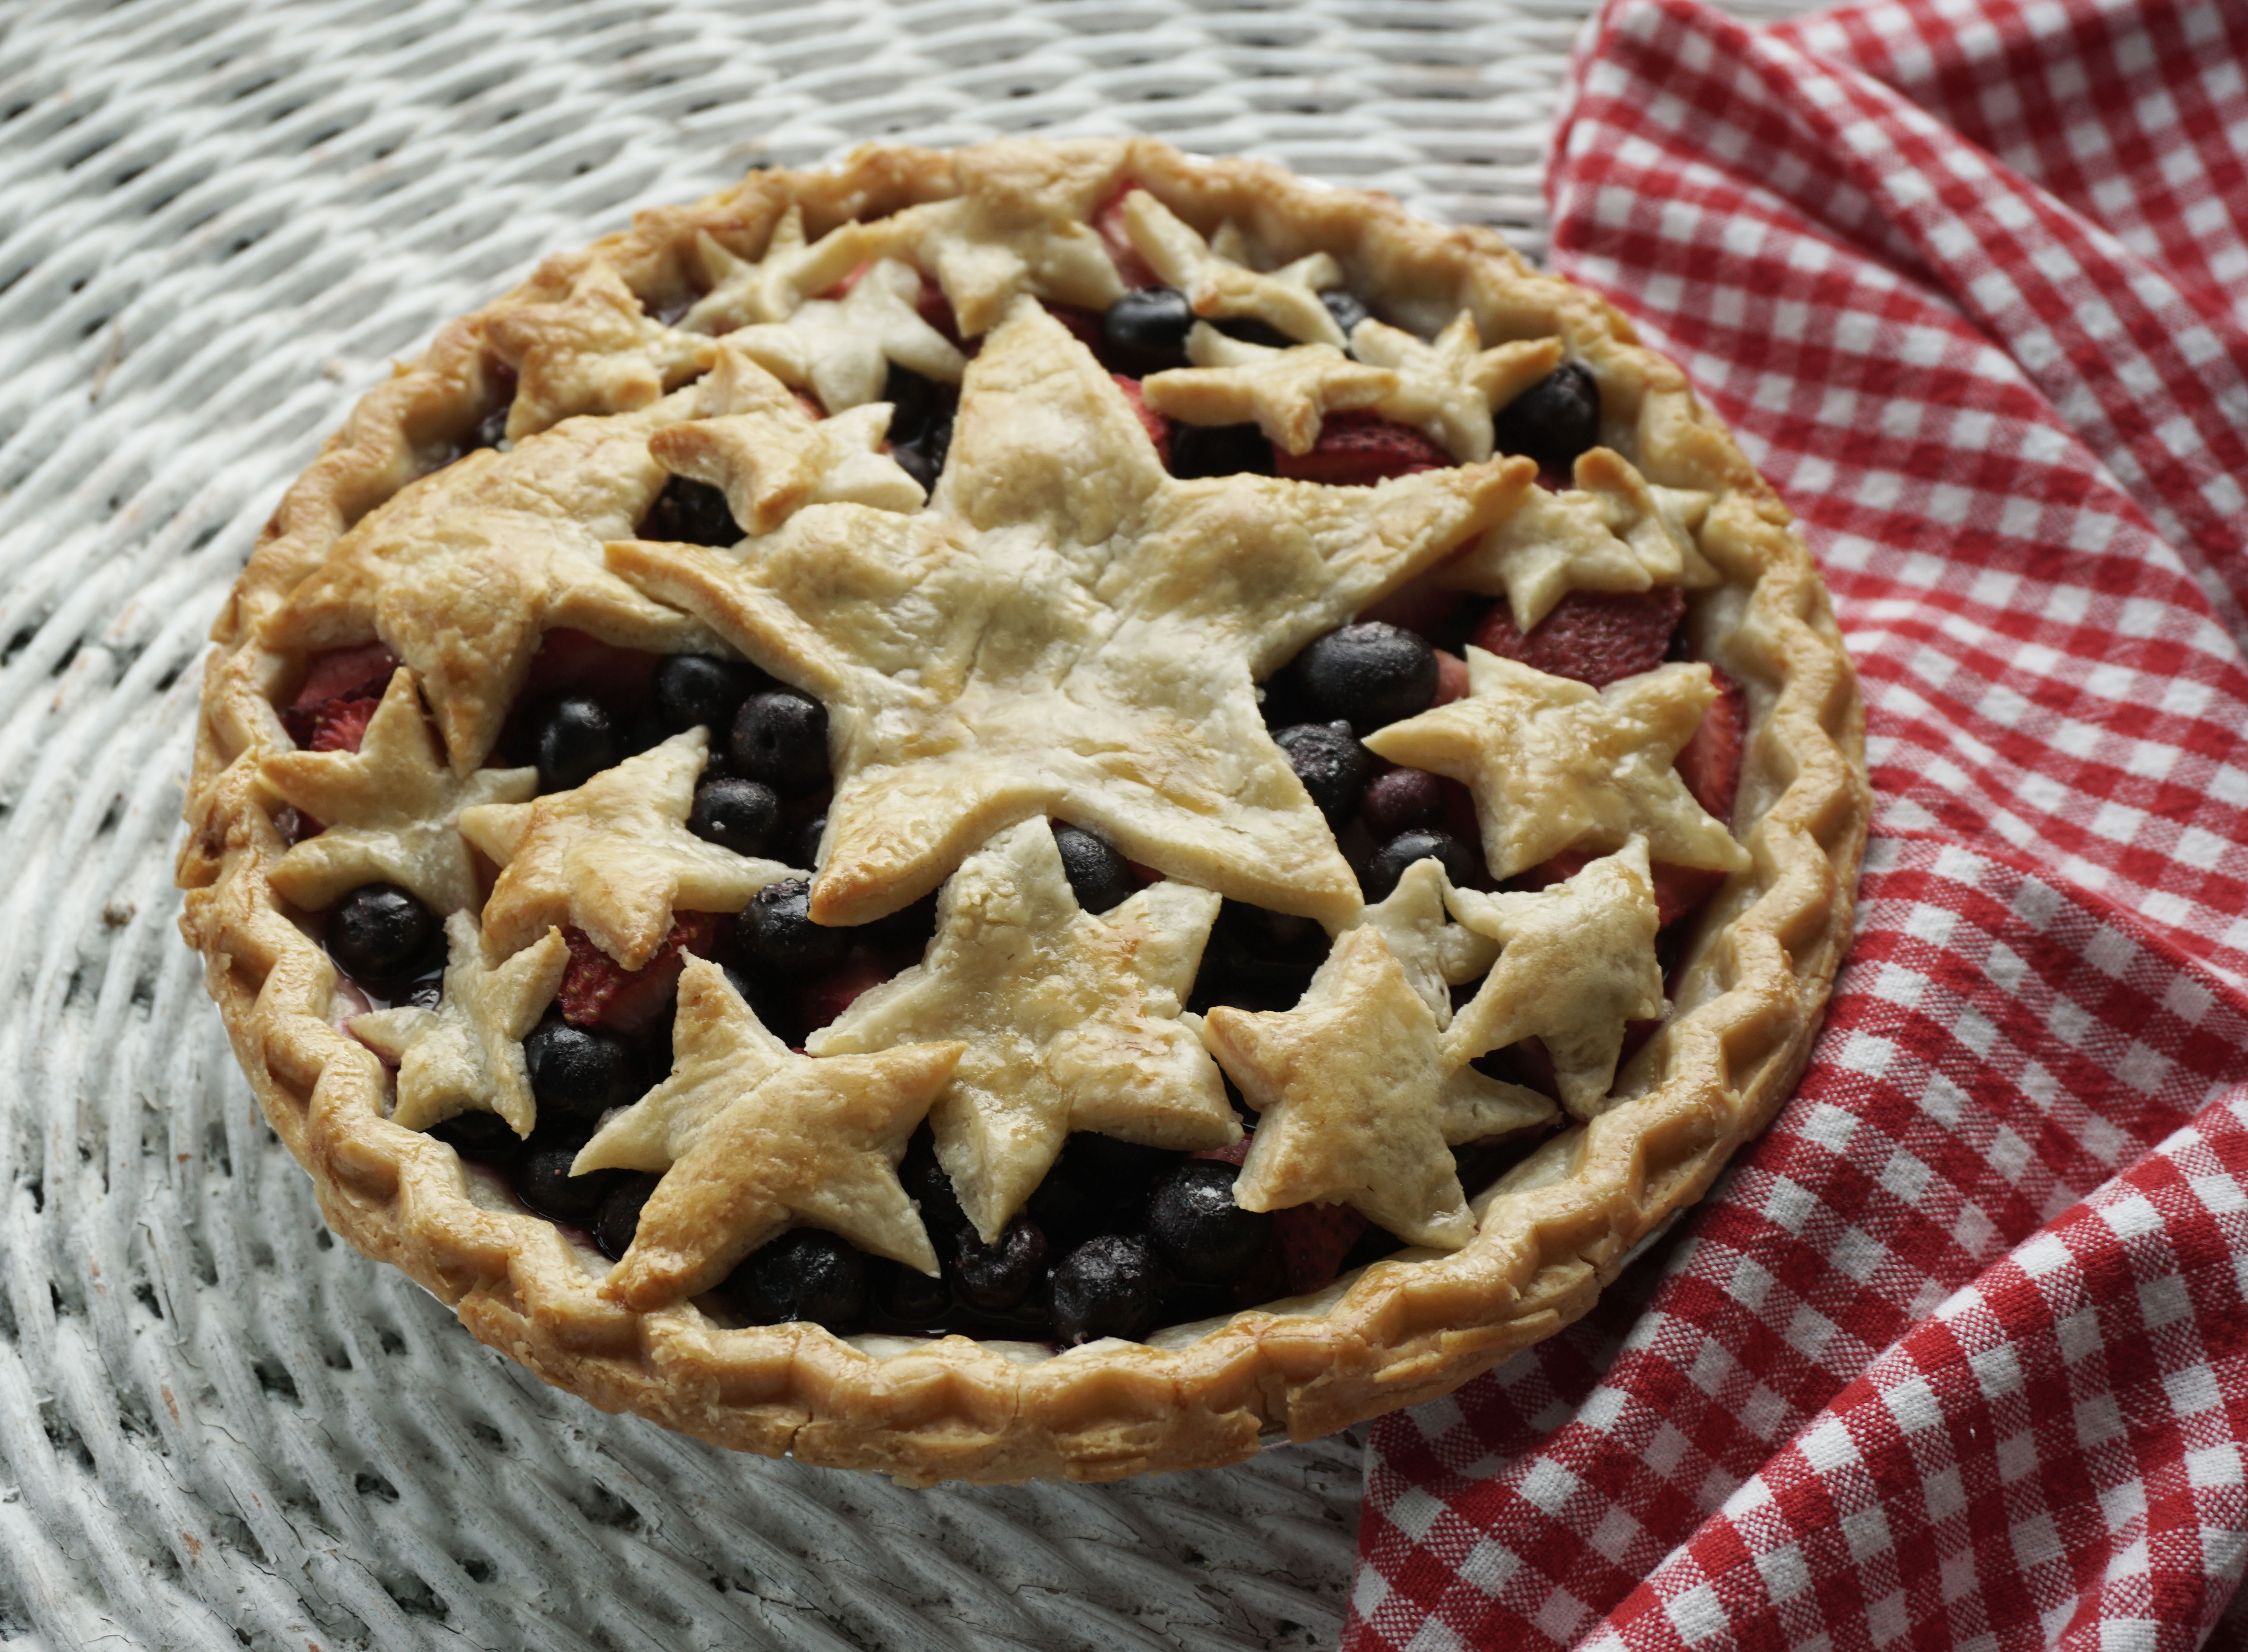 Short on time but still want to make a very berry fourth of July dessert? Make this mixed berry pie with store bought crust! Its yummy and patriotic!